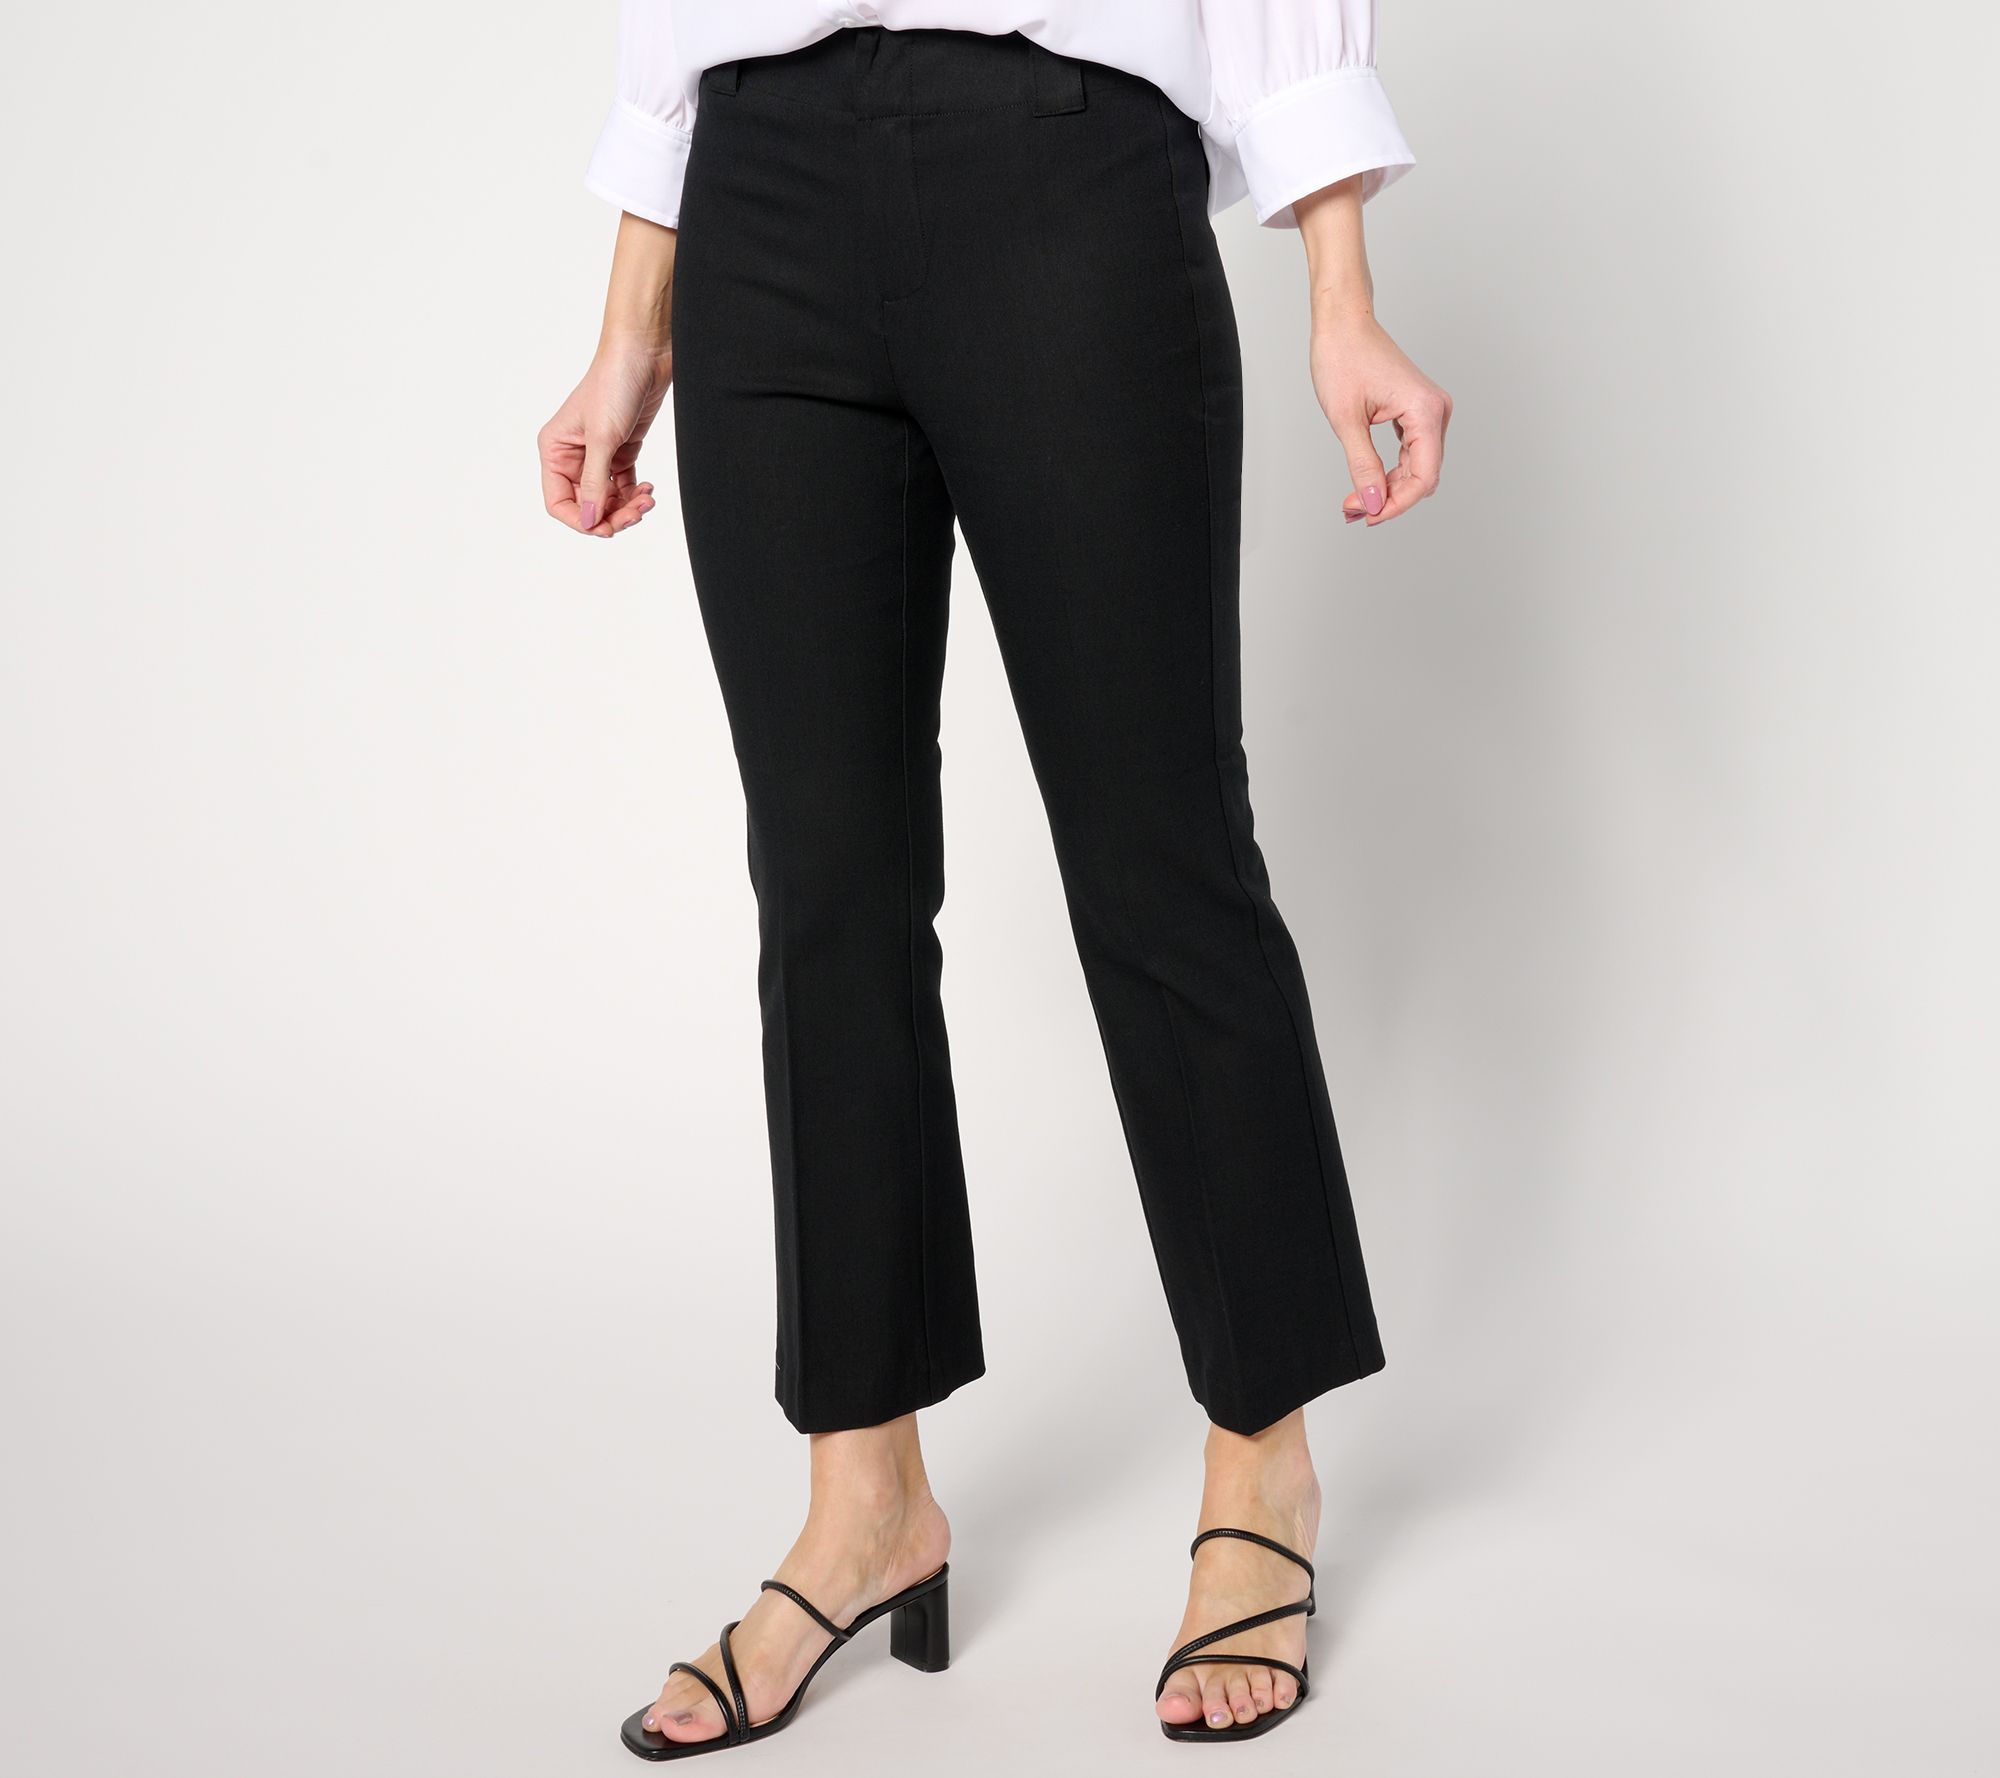 28 Demi Boot Ankle Plaza Pant, Nic+Zoe